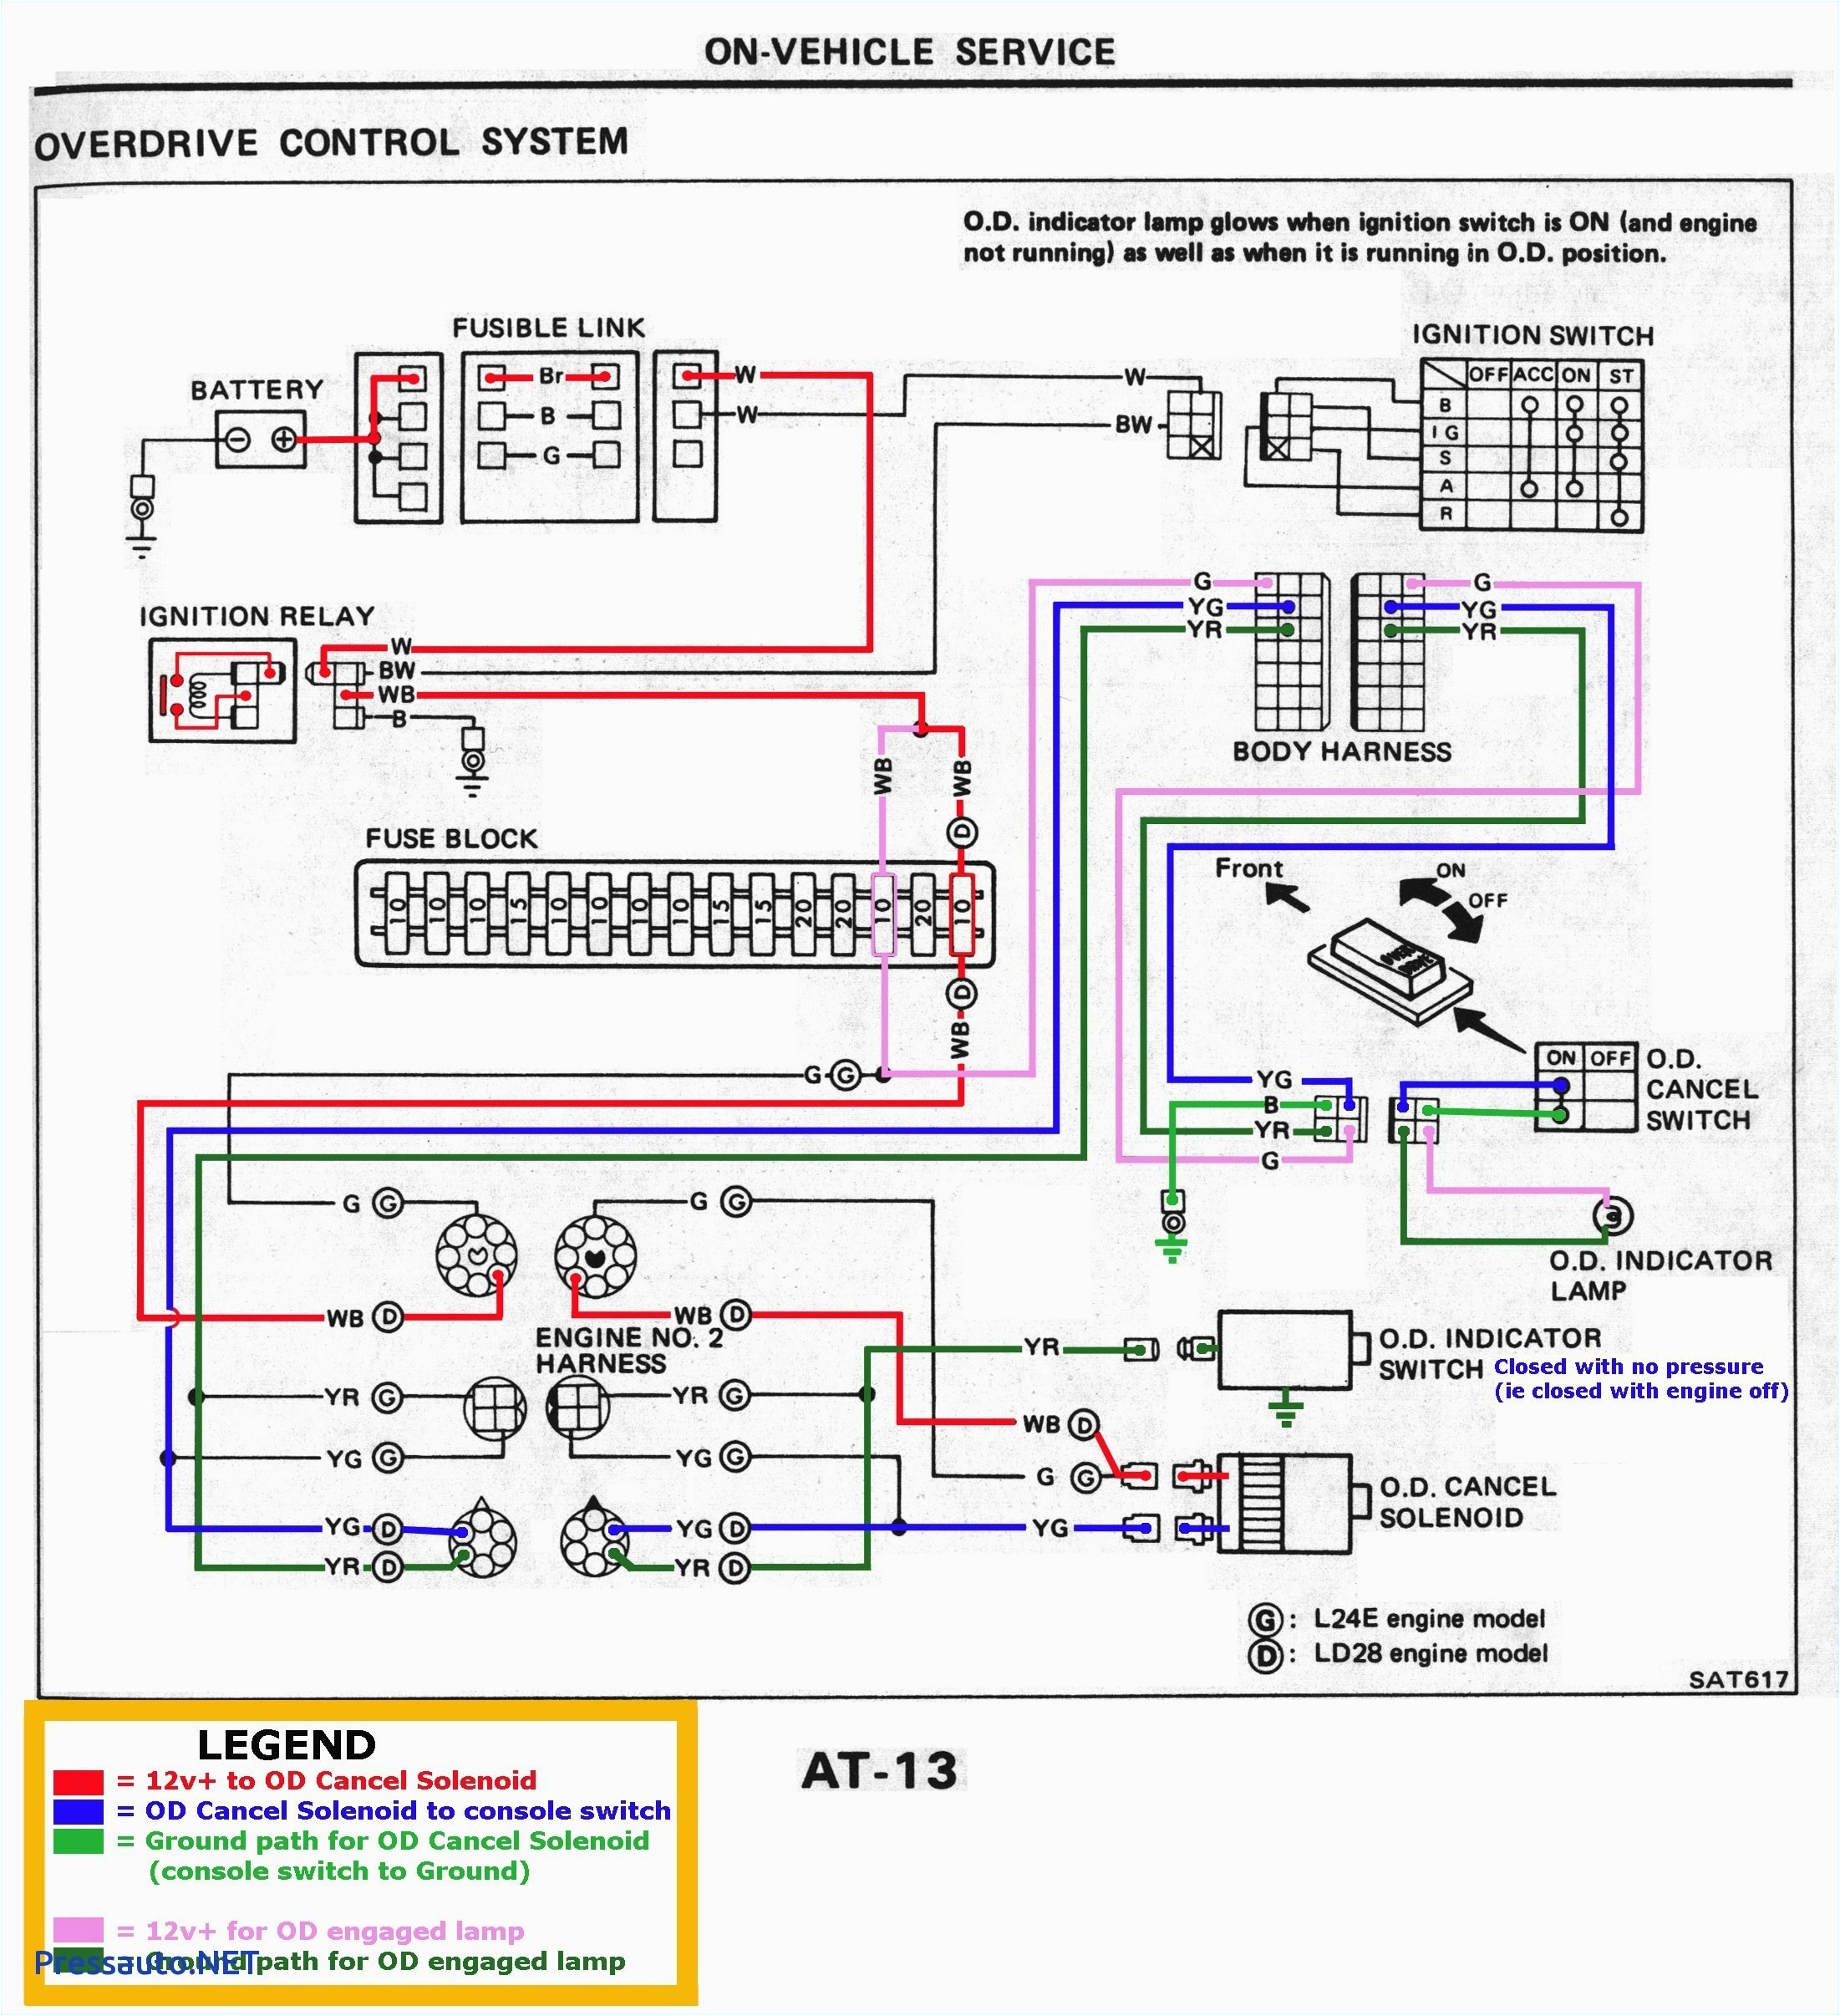 taylor dunn wiring diagram ignition wiring diagram view taylor dunn wiring diagram 106882